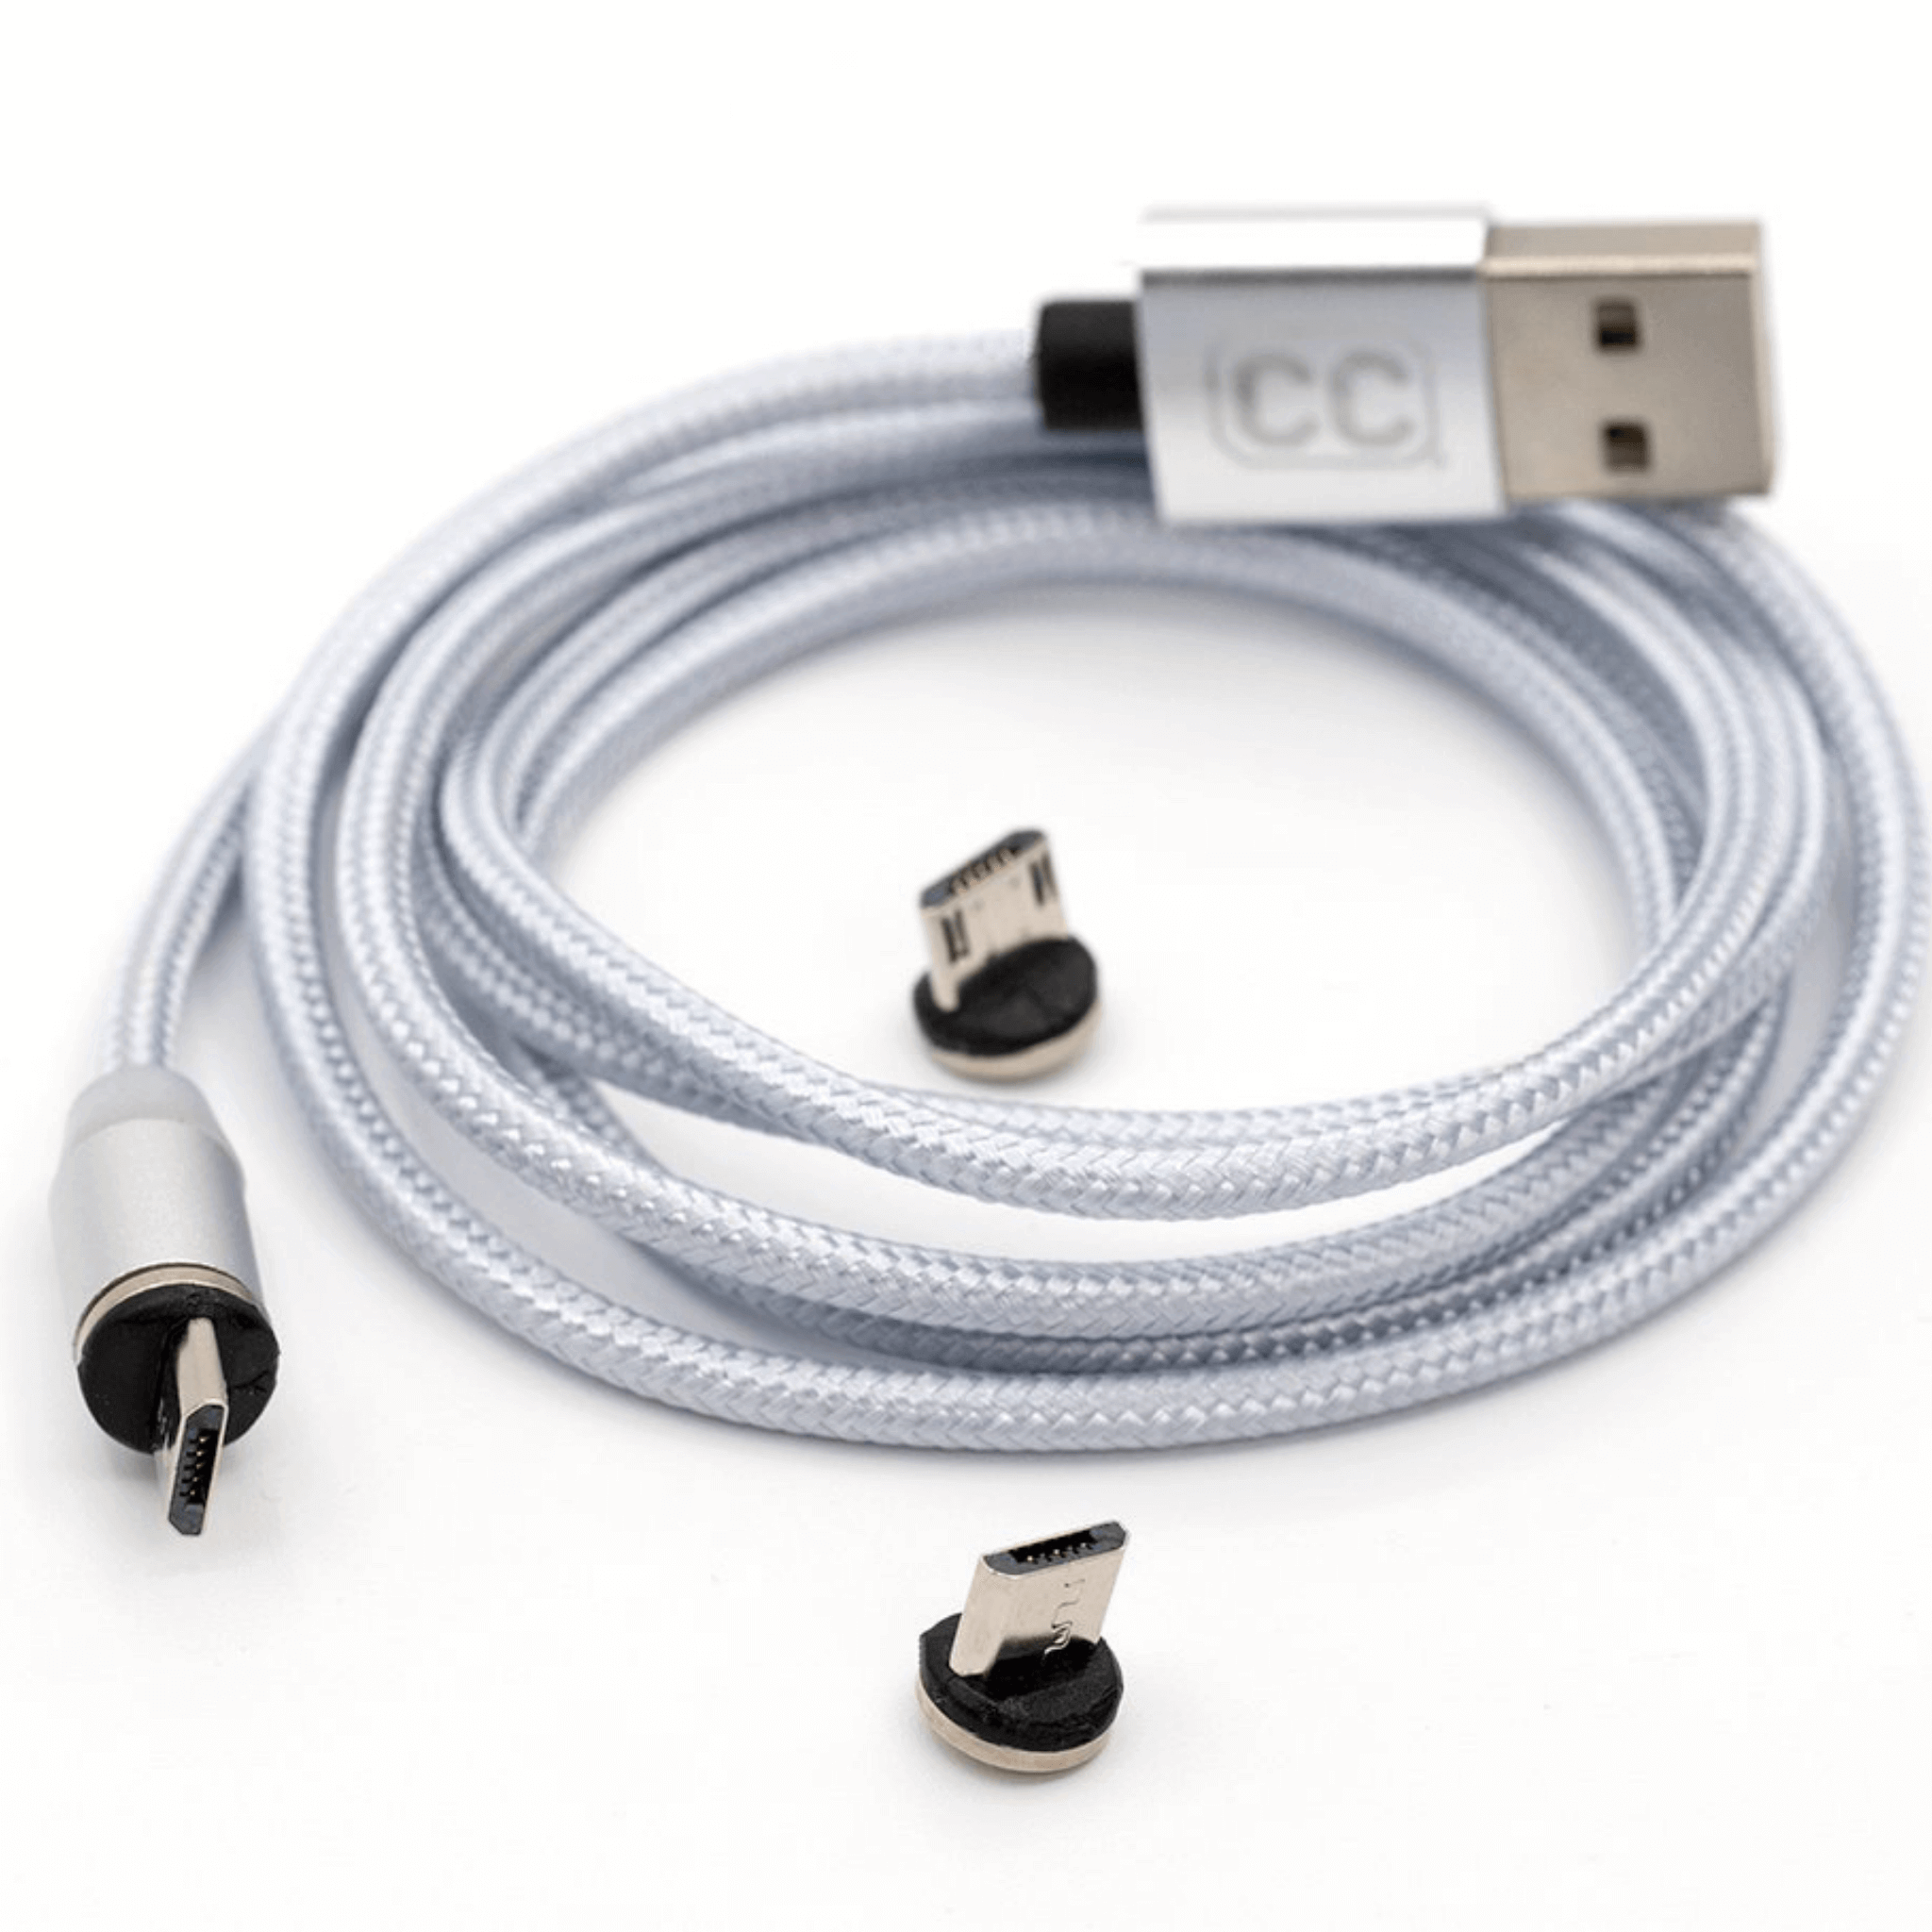 Coinkite Coldcard MK4 Pack of 3 Cryyptocurrency Hardware Wallets Usb-c Cable